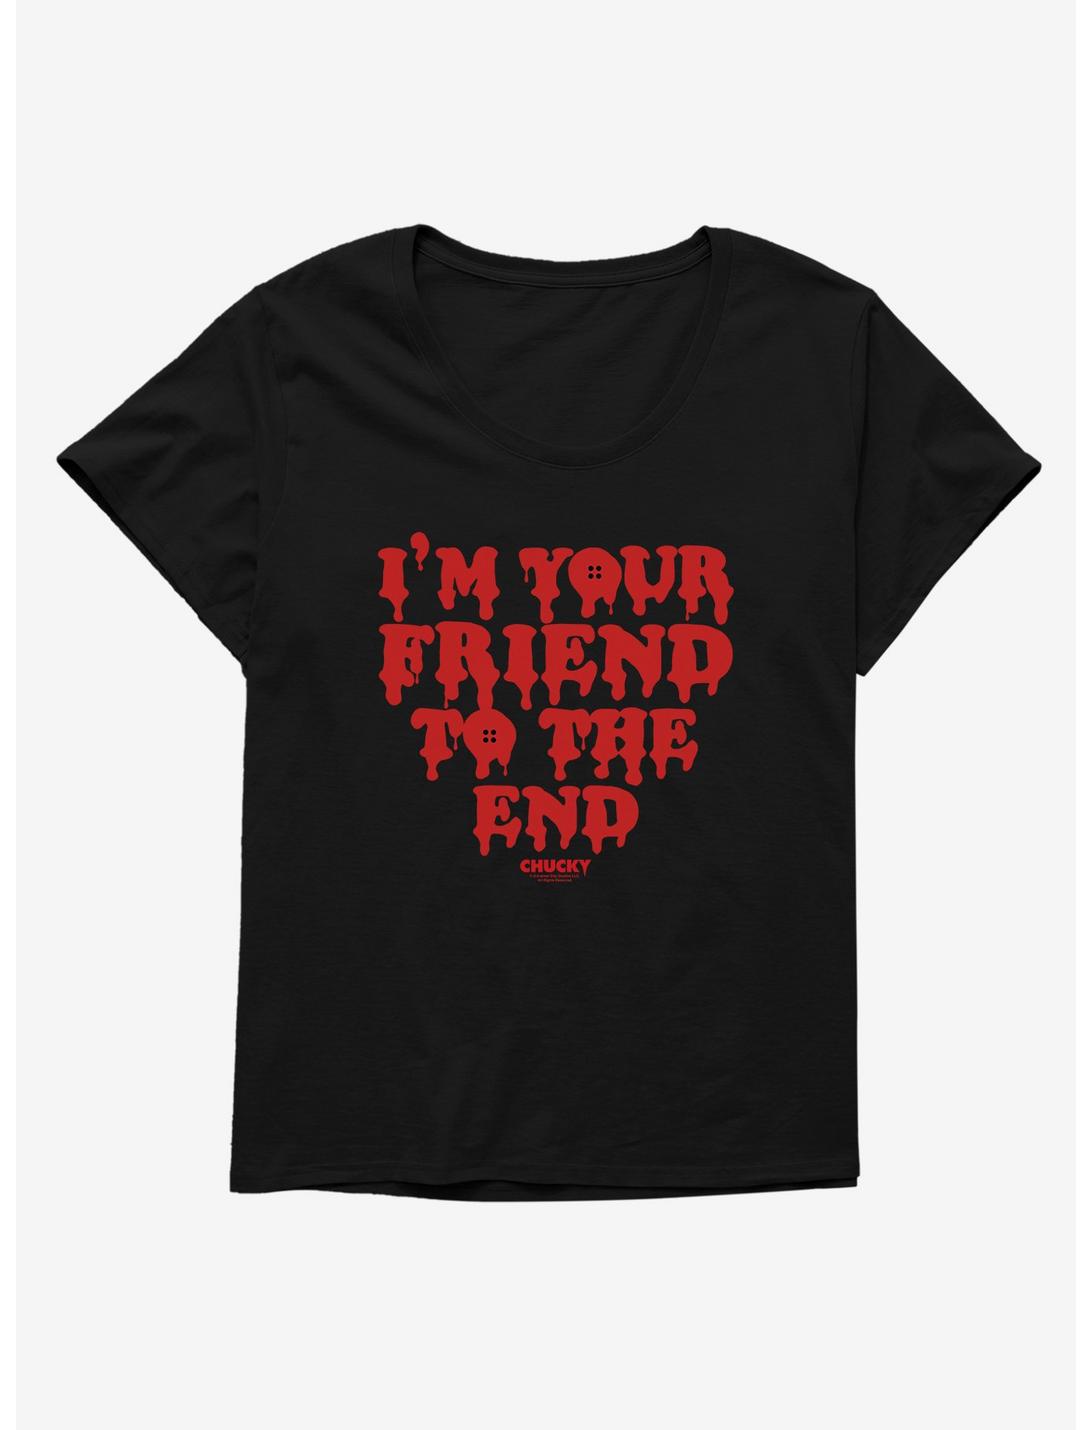 Chucky I'm Your Friend To The End Girls T-Shirt Plus Size, BLACK, hi-res